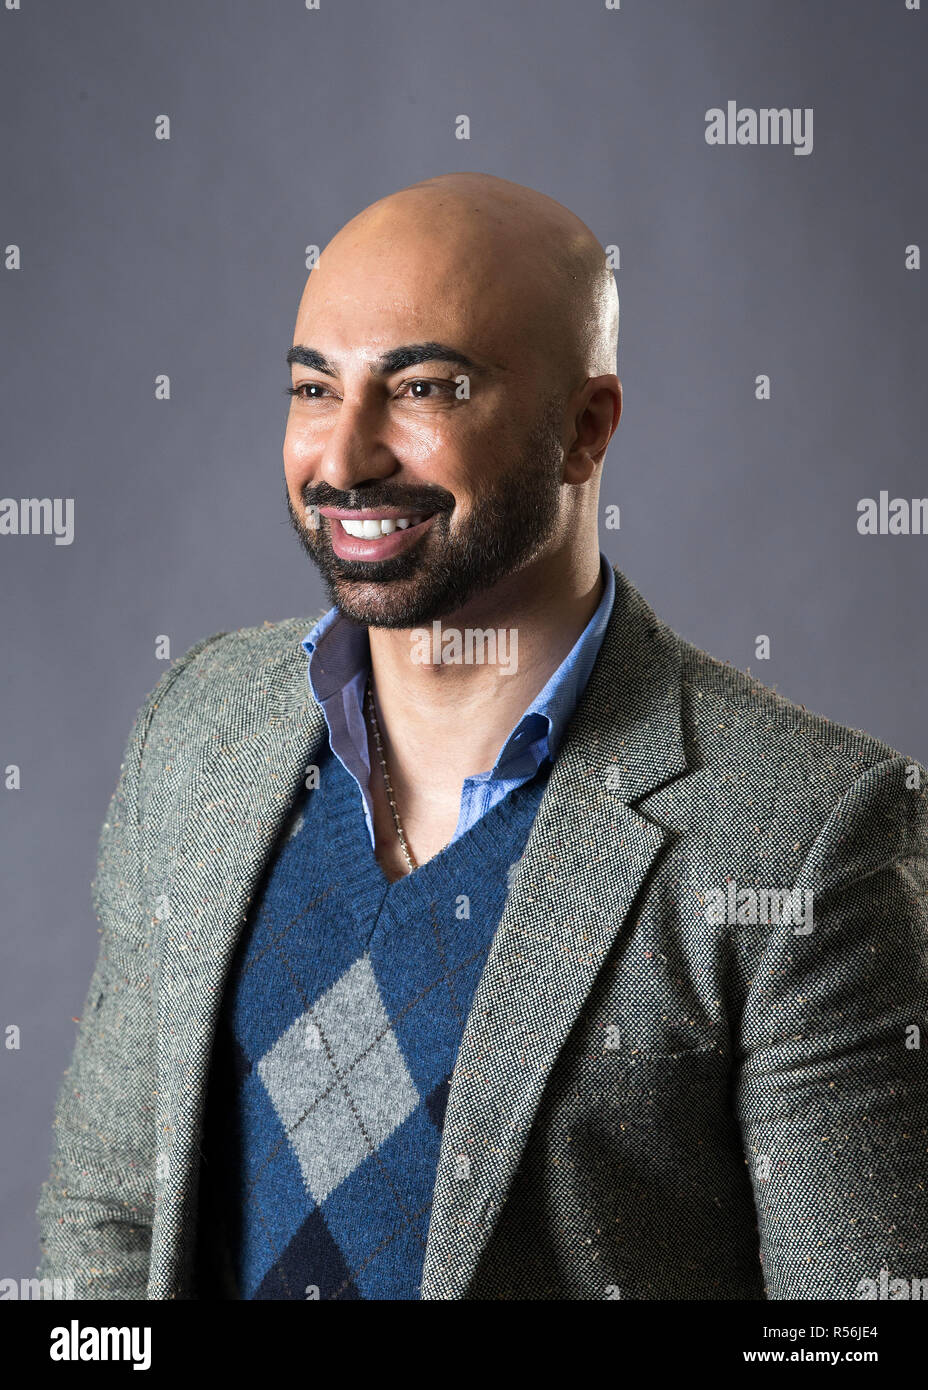 Hassan Sheheryar Yasin, simply known as H S Y, is a Pakistani fashion designer. He was salutatorian of the Pakistan School of Fashion Design. Stock Photo